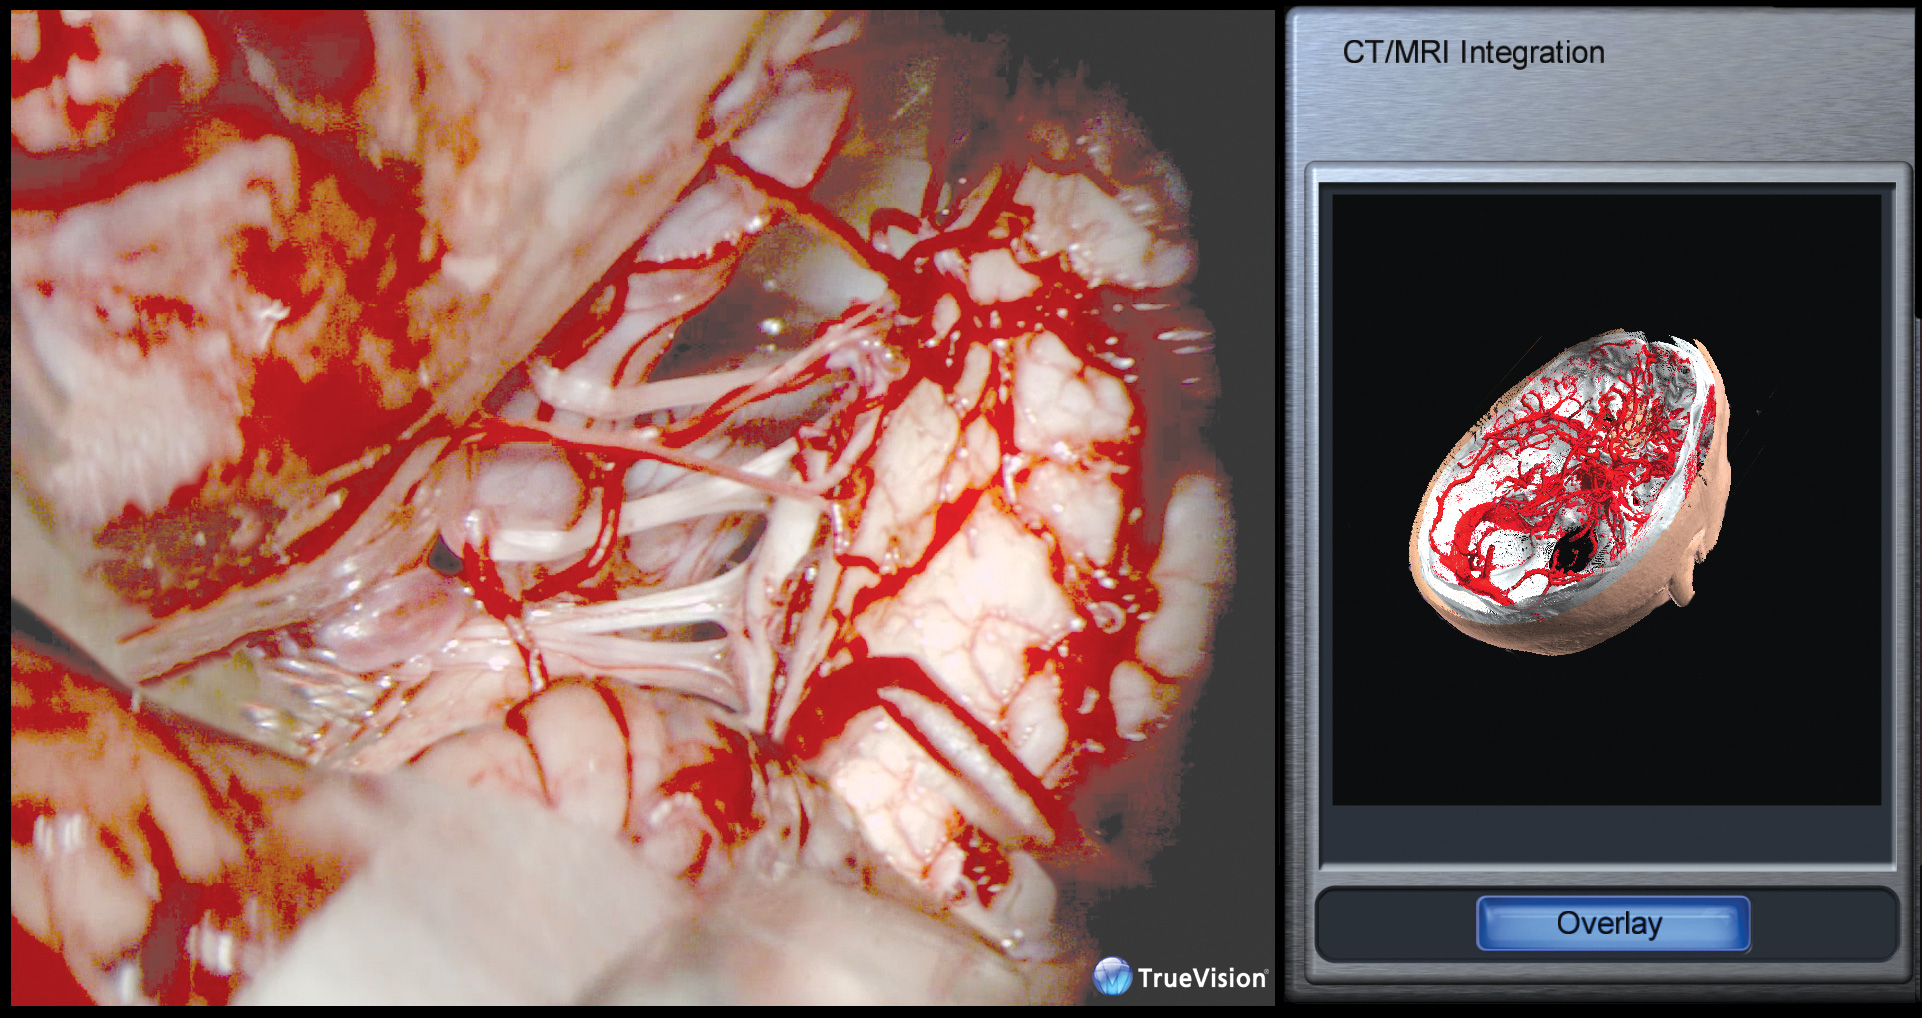 Overlay CT/MRI data into the surgical field real-time during surgical procedures